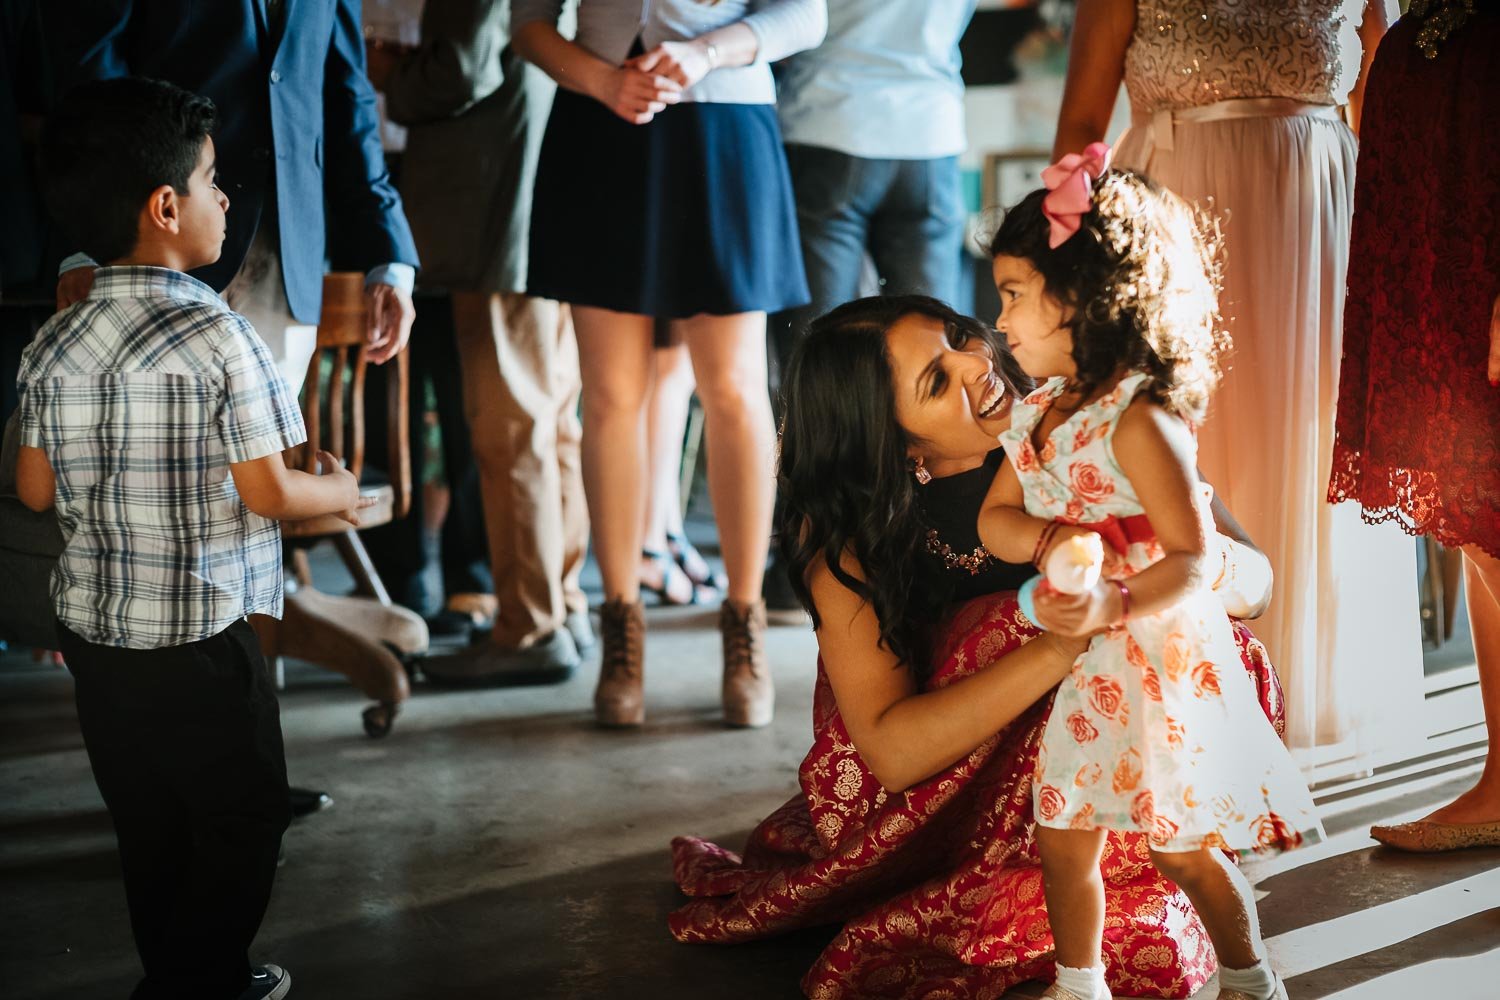 Bride cuddles young girl at The Infinite Monkey Theorem during a rehearsal dinner party